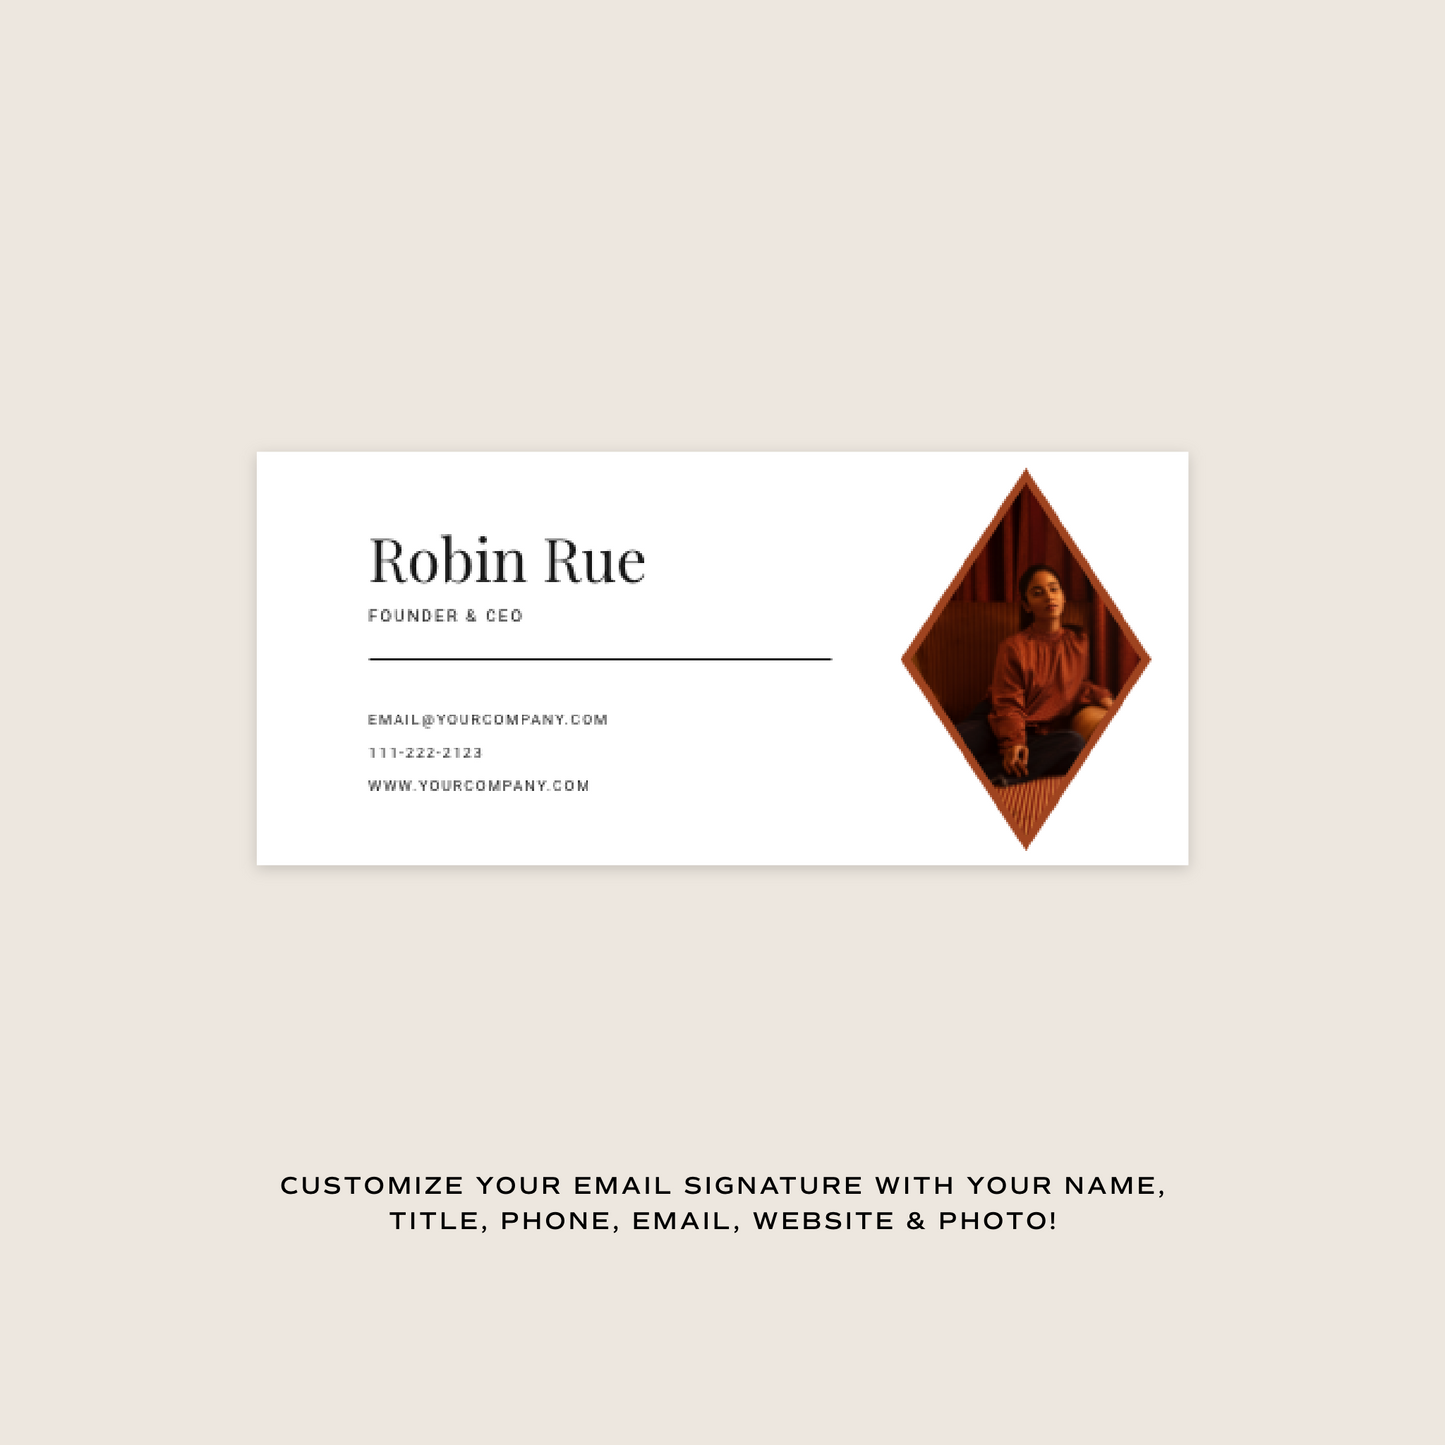 Robin Email Signature Collection